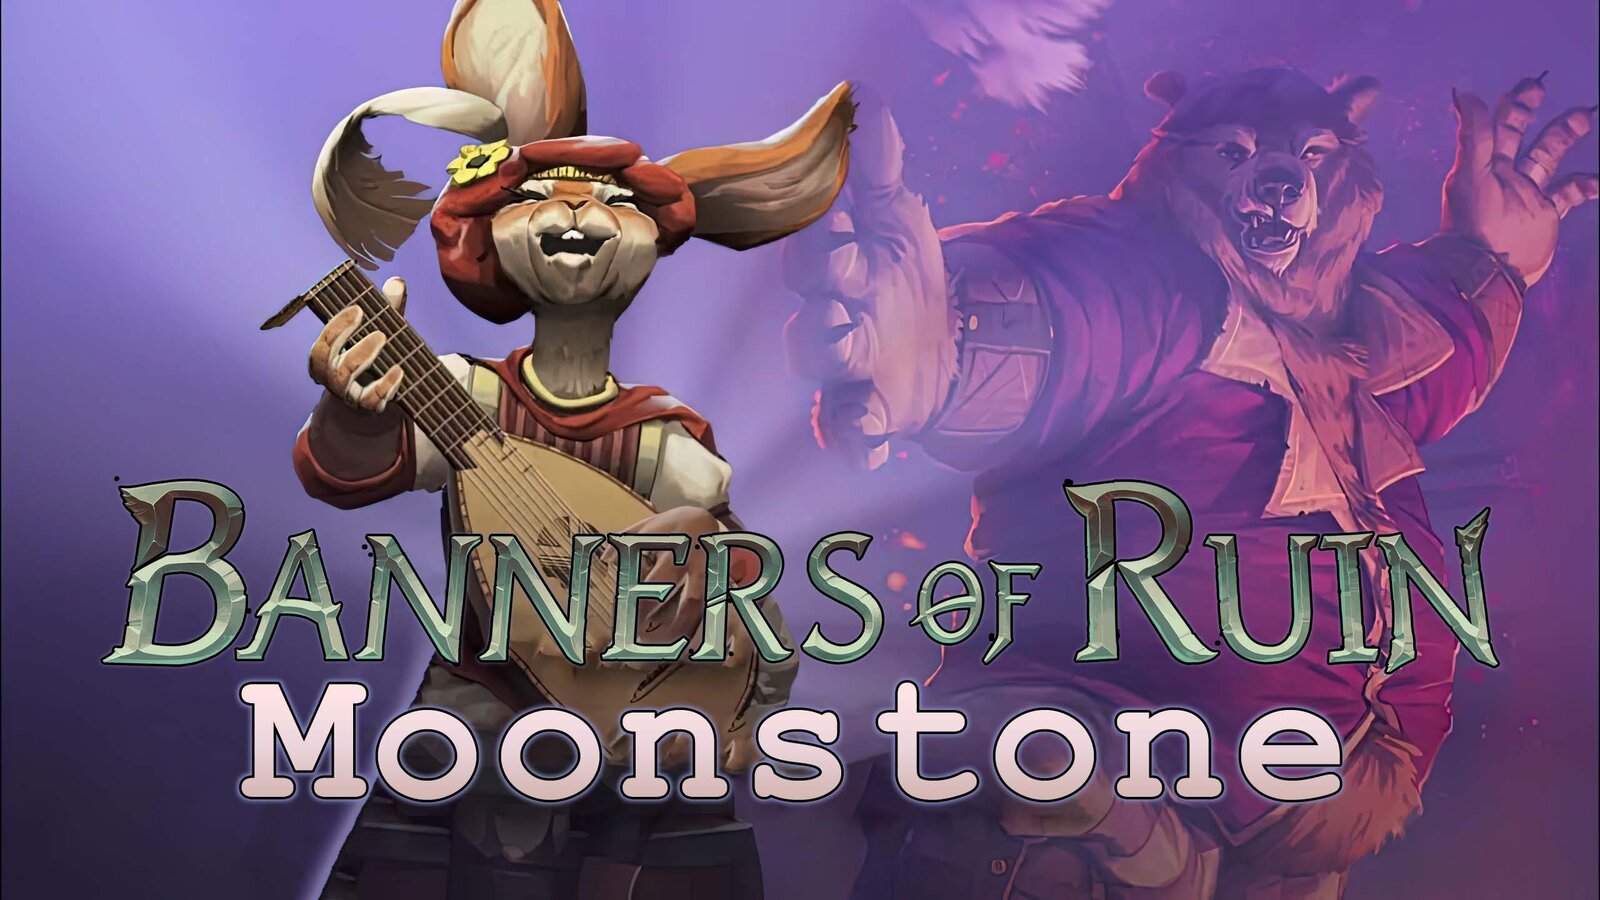 Banners of Ruin - Moonstone